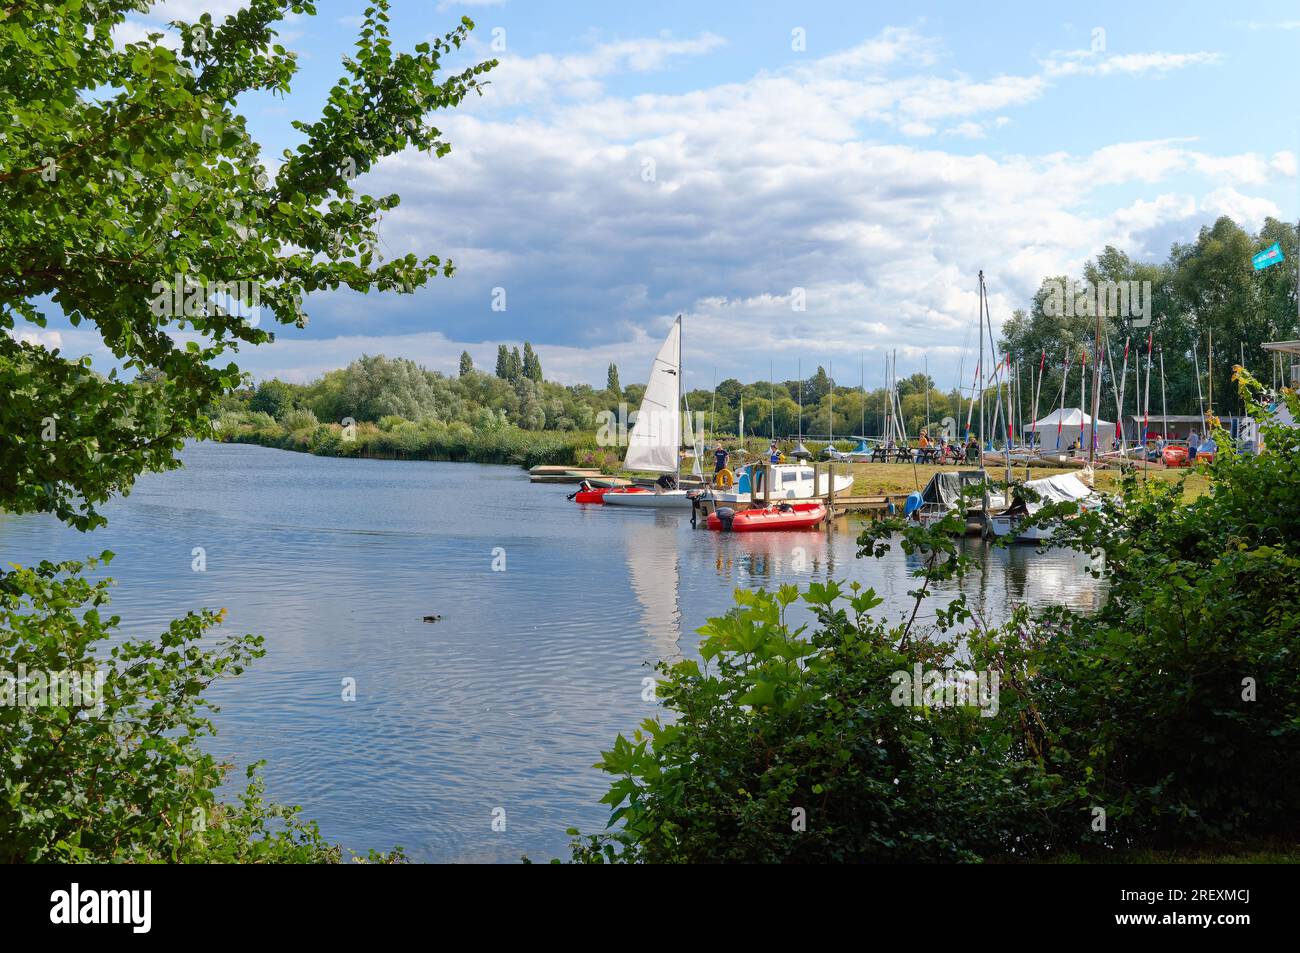 The Desborouigh Sailing Club by the River Thames at Shepperton on a summers day, Surrey England UK Stock Photo